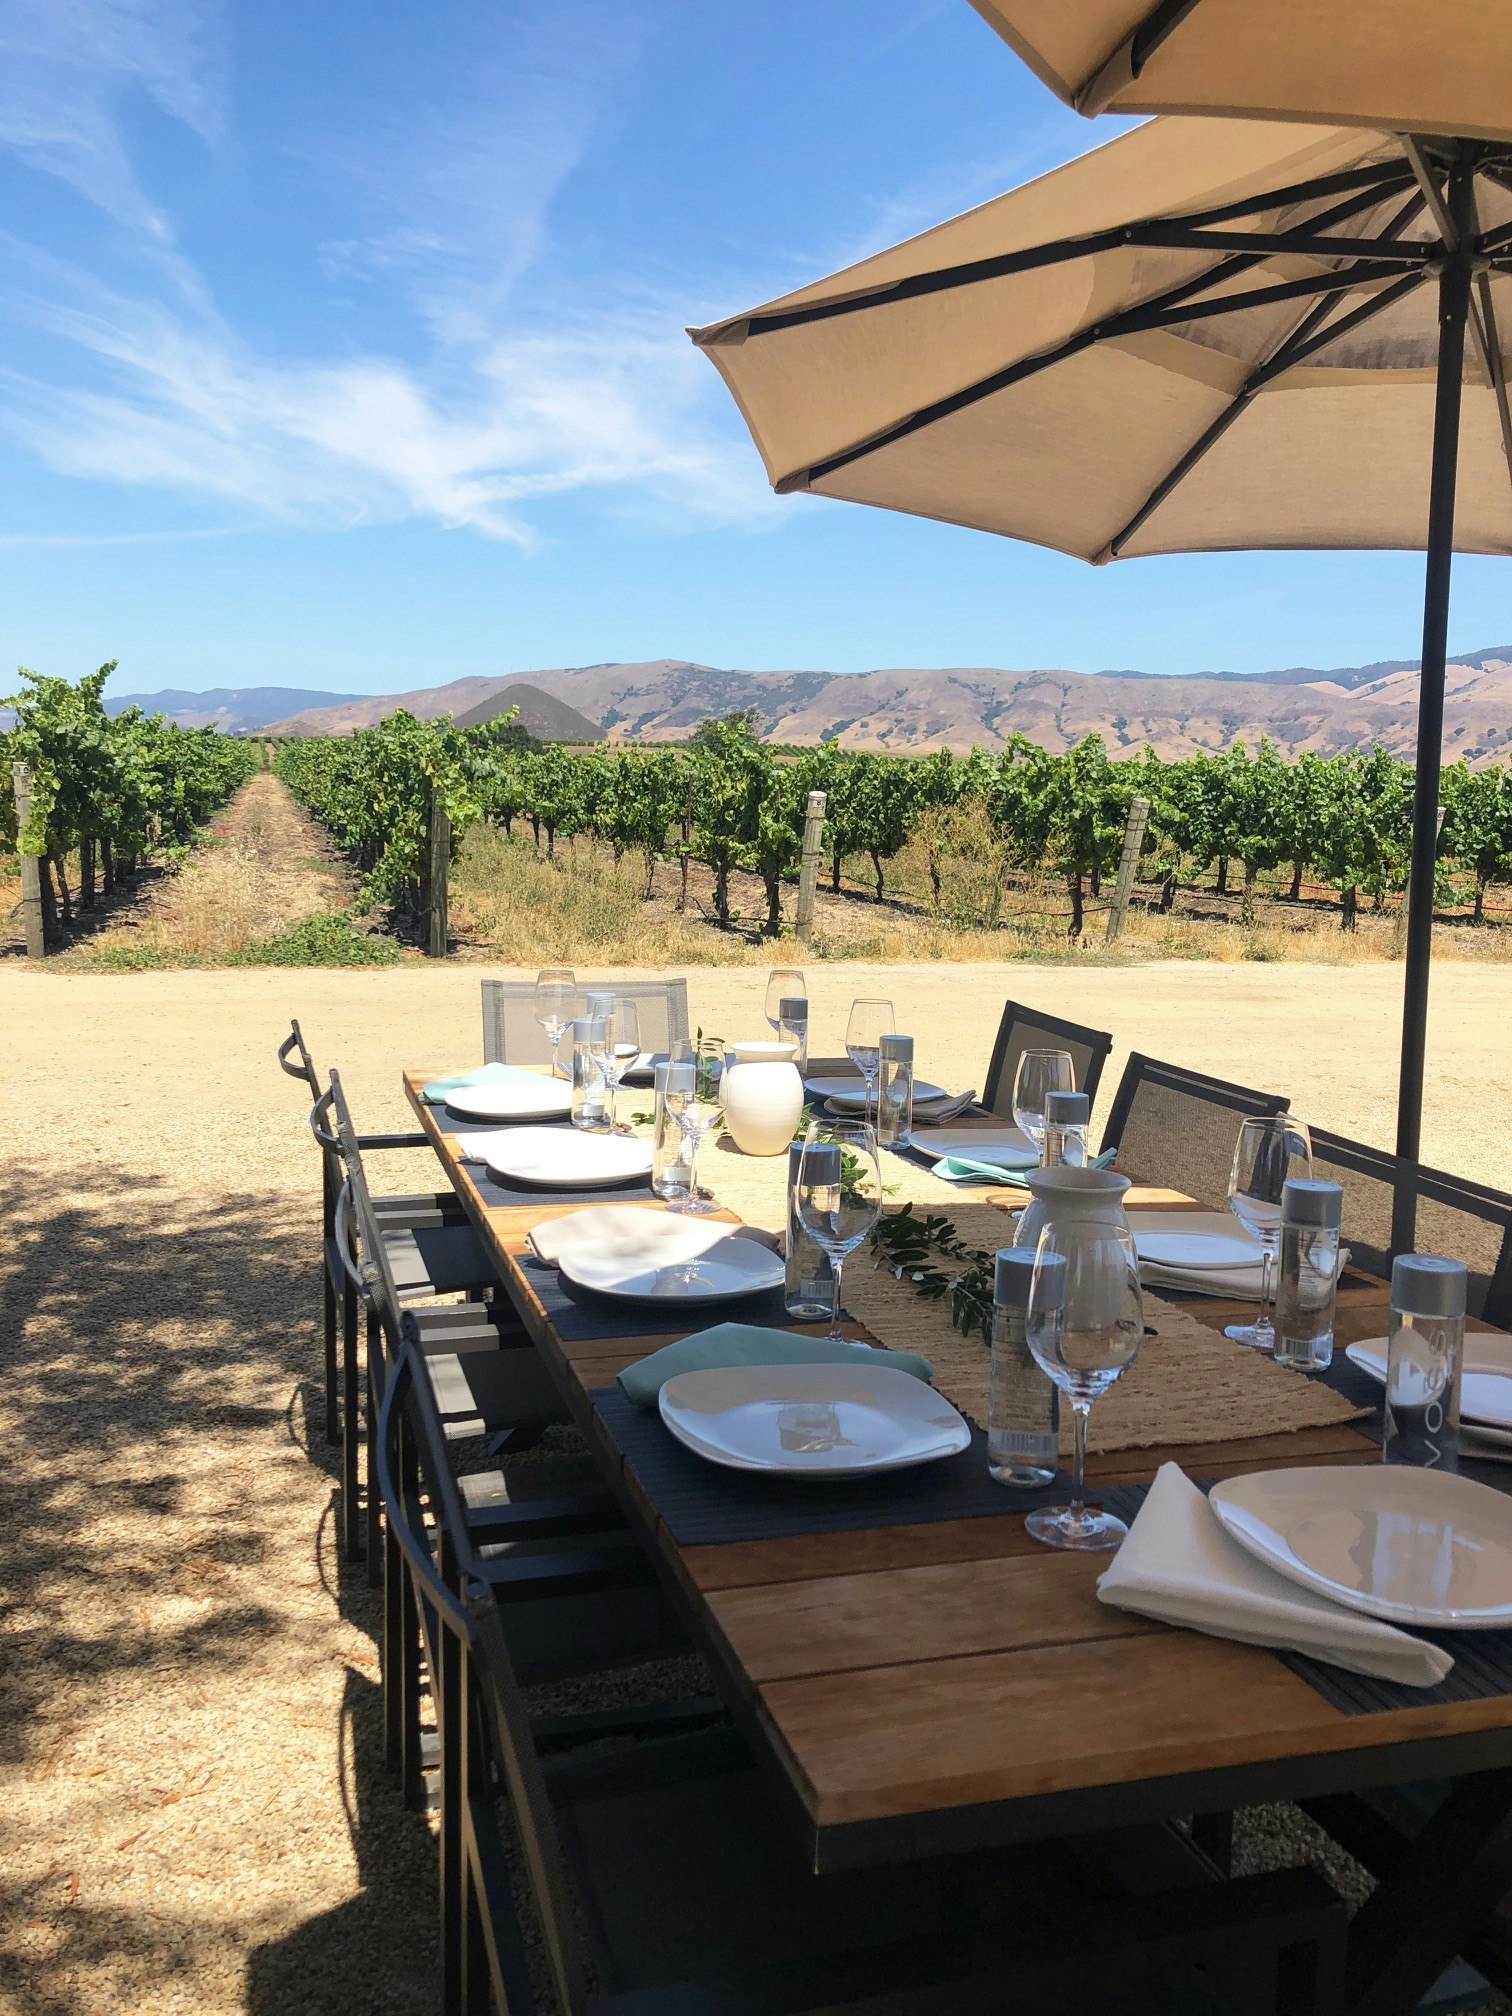 A table is set for dinner next to rows of grapevines.